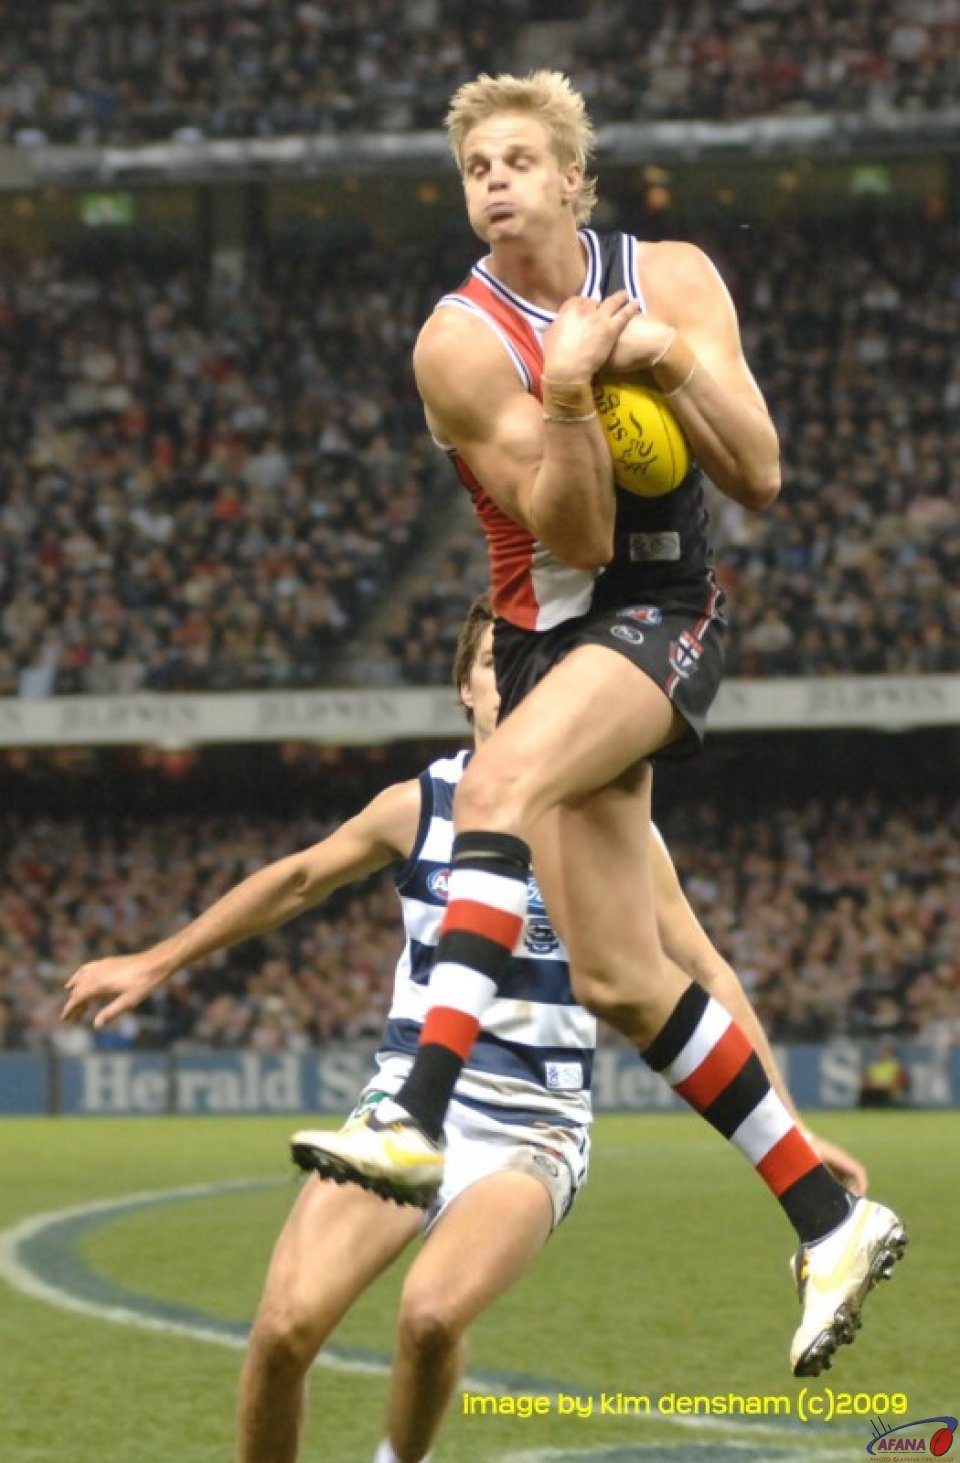 Riewoldt On The Lead